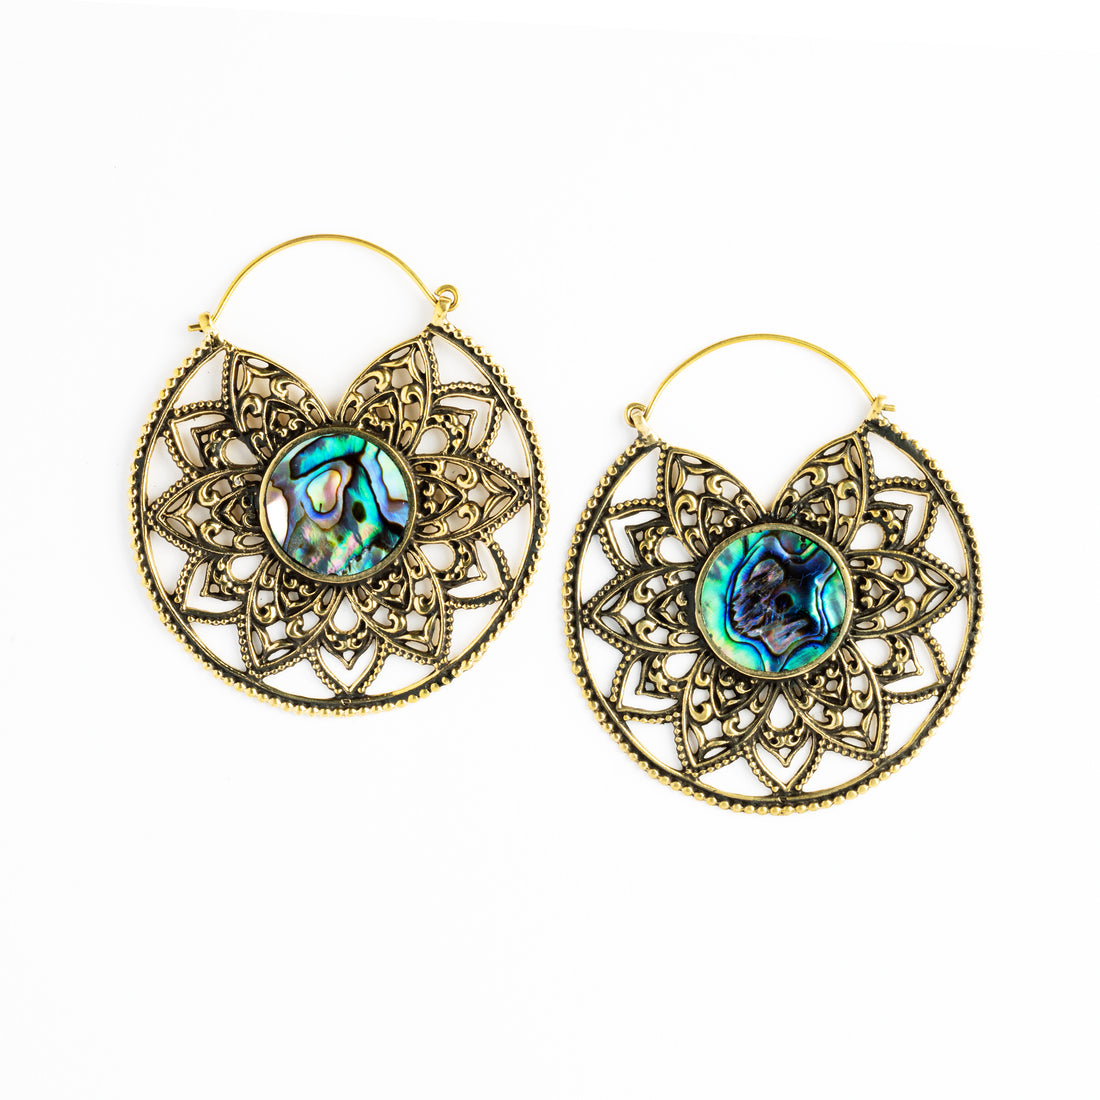 pair of golden brass large lotus open mandala earrings with centred abalone frontal view